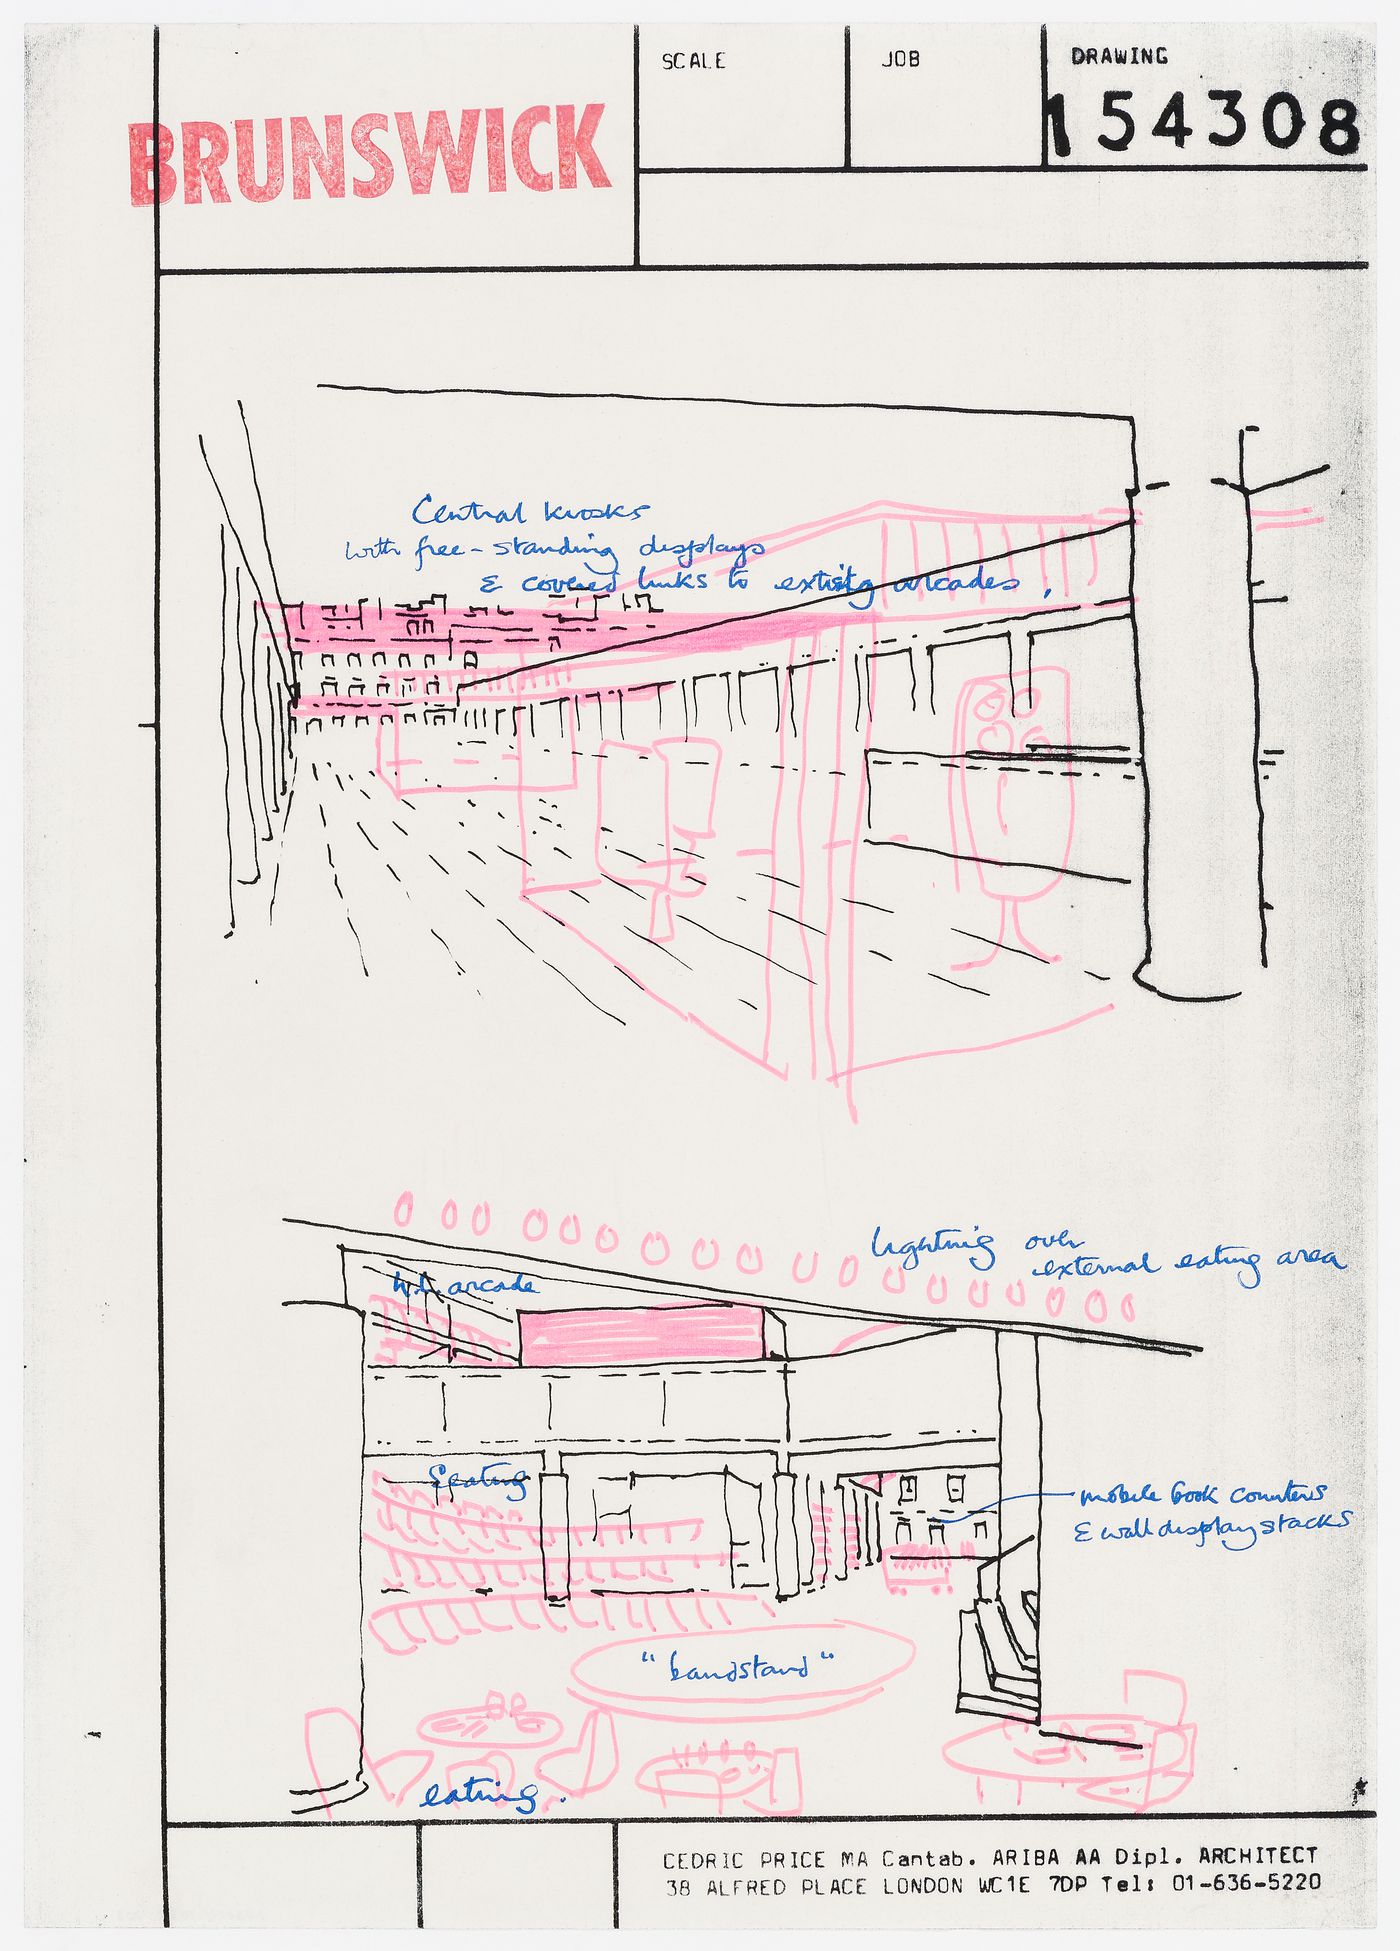 Brunswick: perspective sketches of central kiosks and eating area